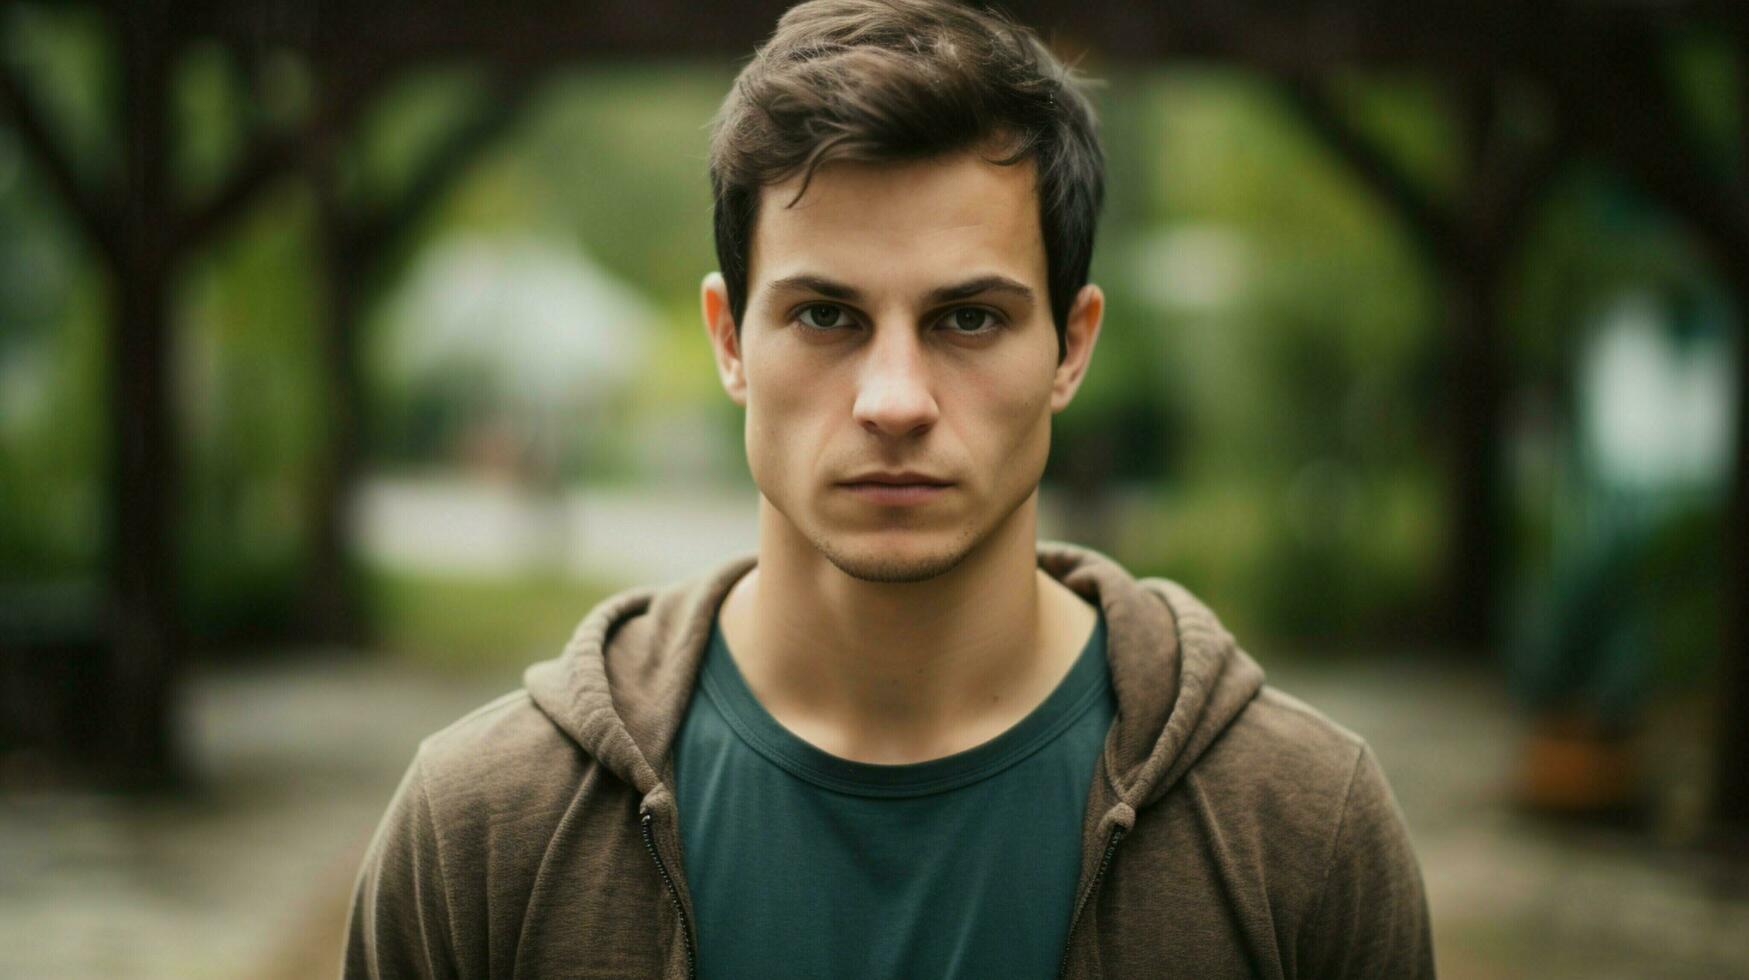 young adult man confident and serious looking at camera photo